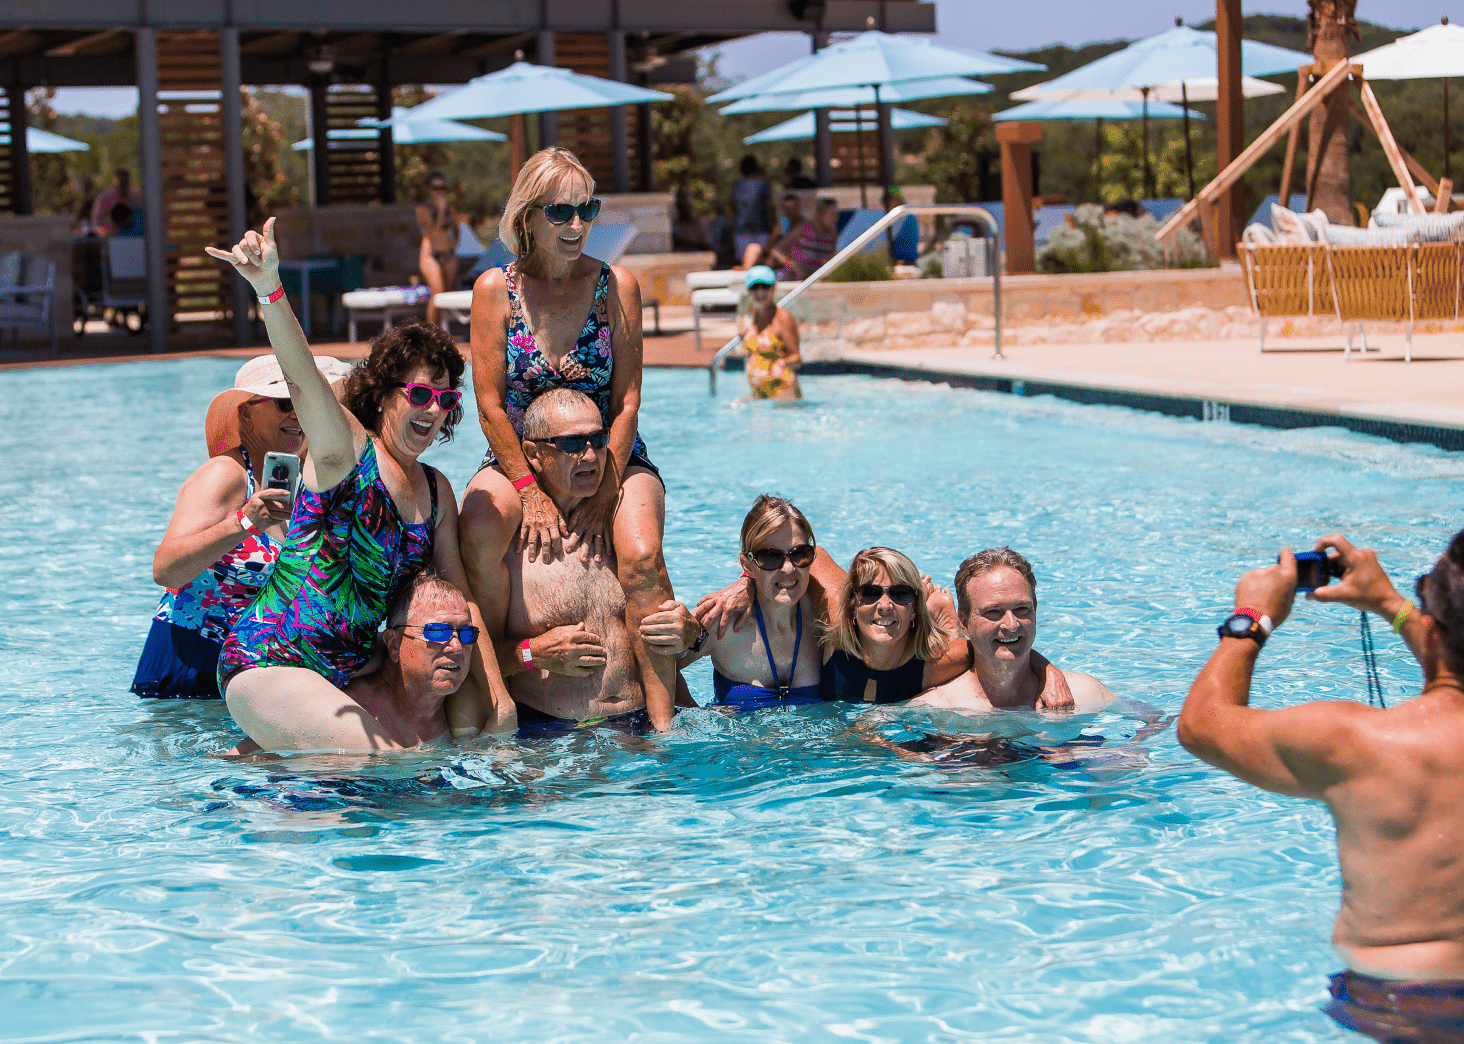 Residents together in the swimming pool taking a group photo